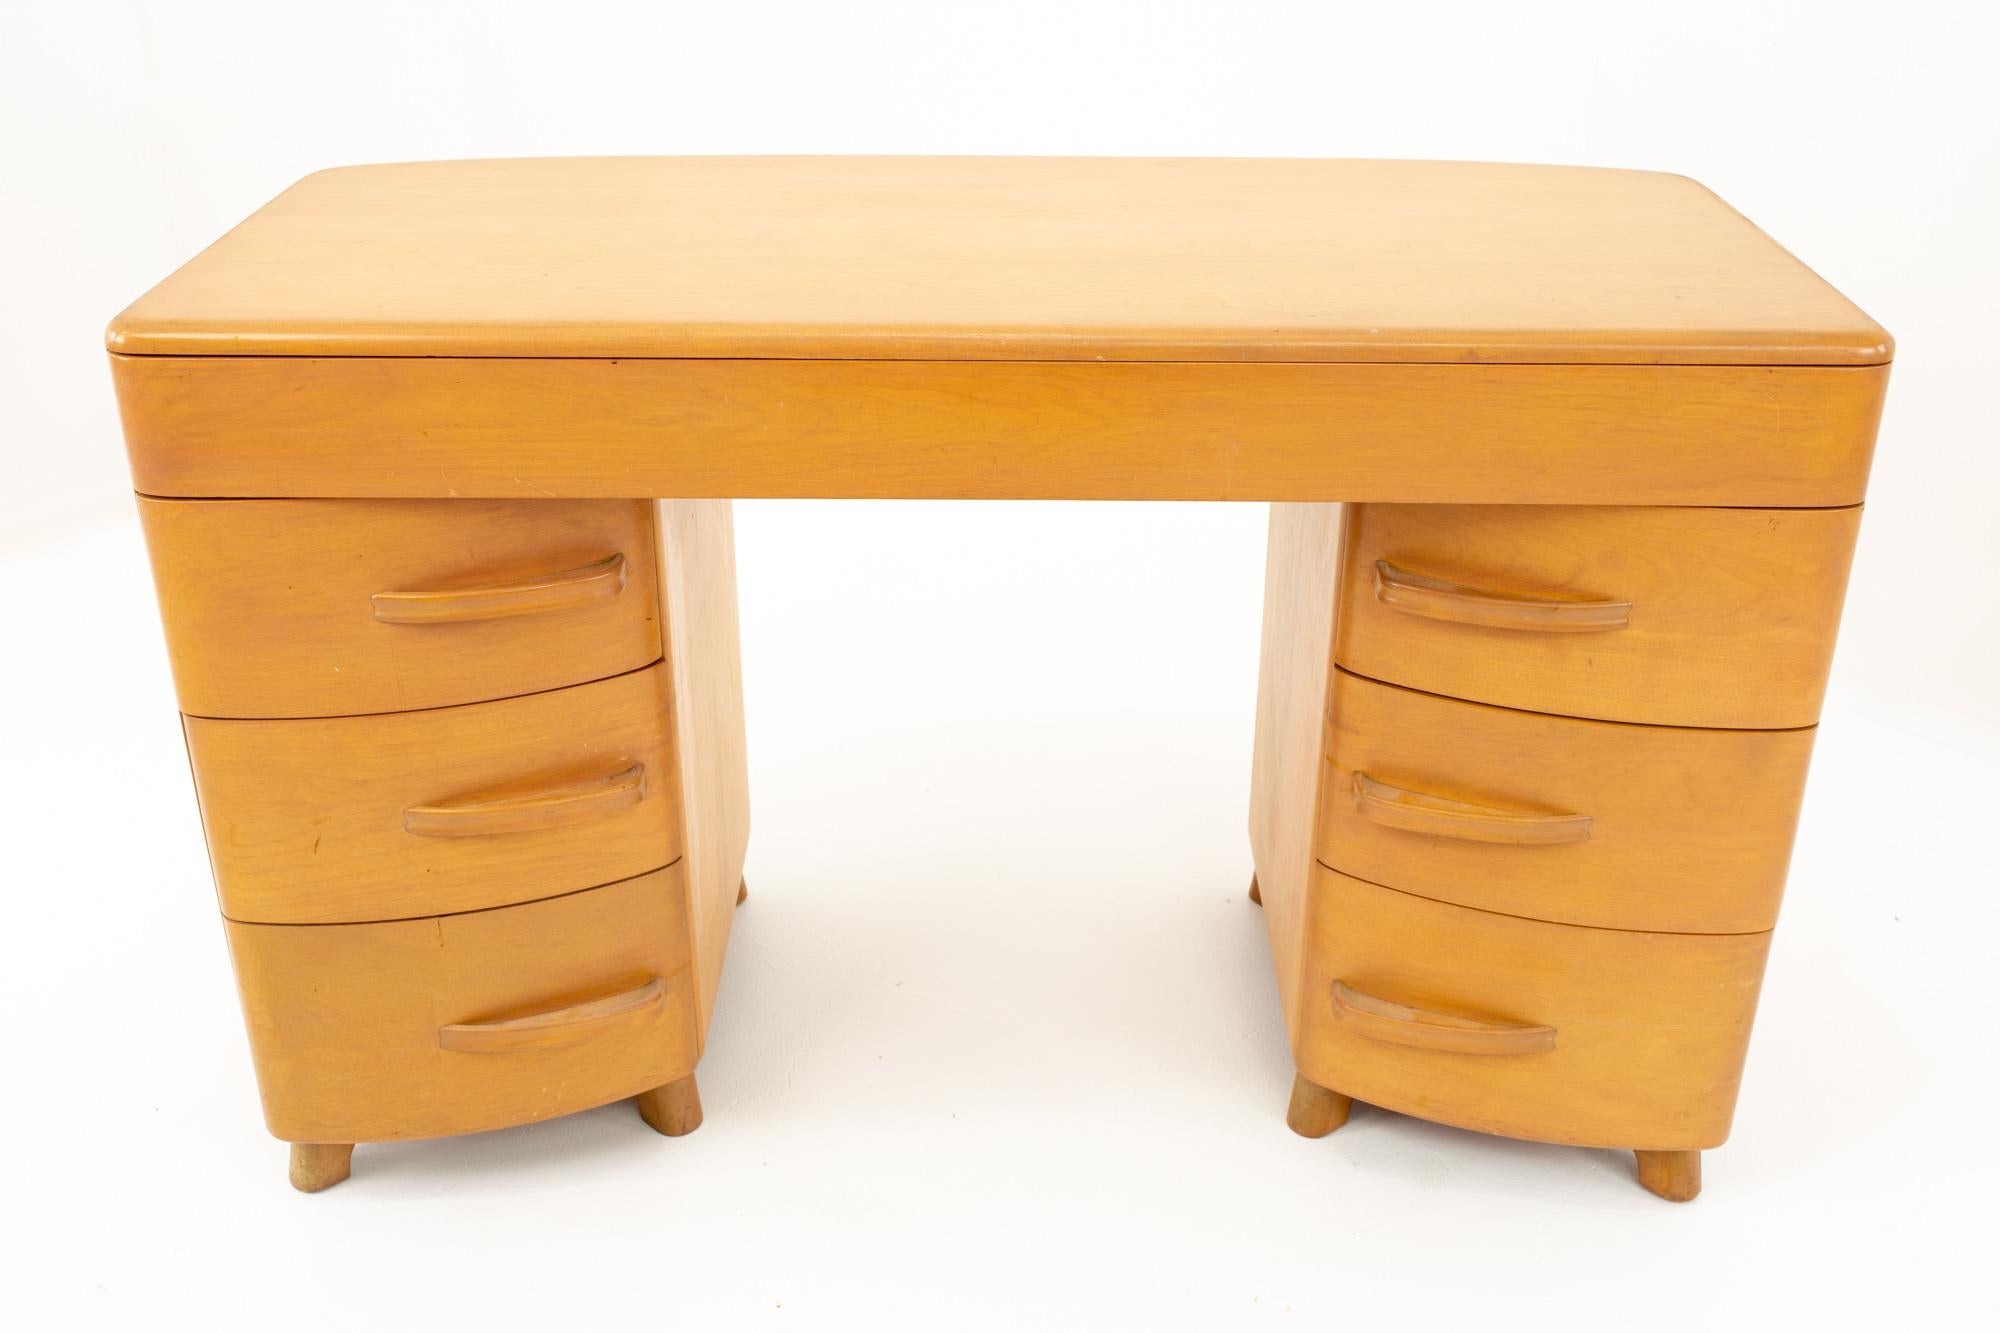 Heywood Wakefield mid century vanity or desk

Desk measures: 49.75 wide x 24 deep x 29.25 high

?All pieces of furniture can be had in what we call restored vintage condition. That means the piece is restored upon purchase so it’s free of